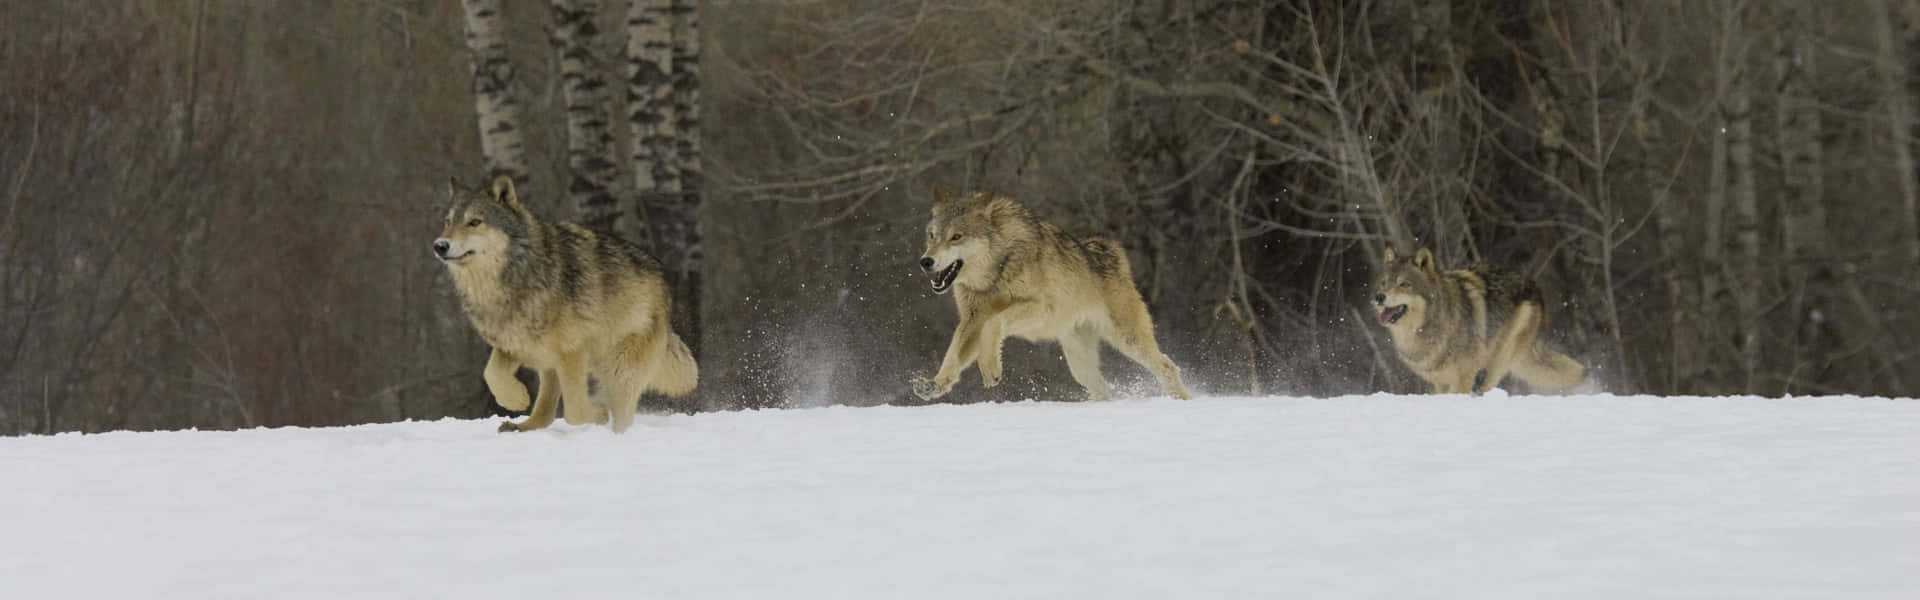 Tense Moments as Wolves Hunt in the Wilderness Wallpaper